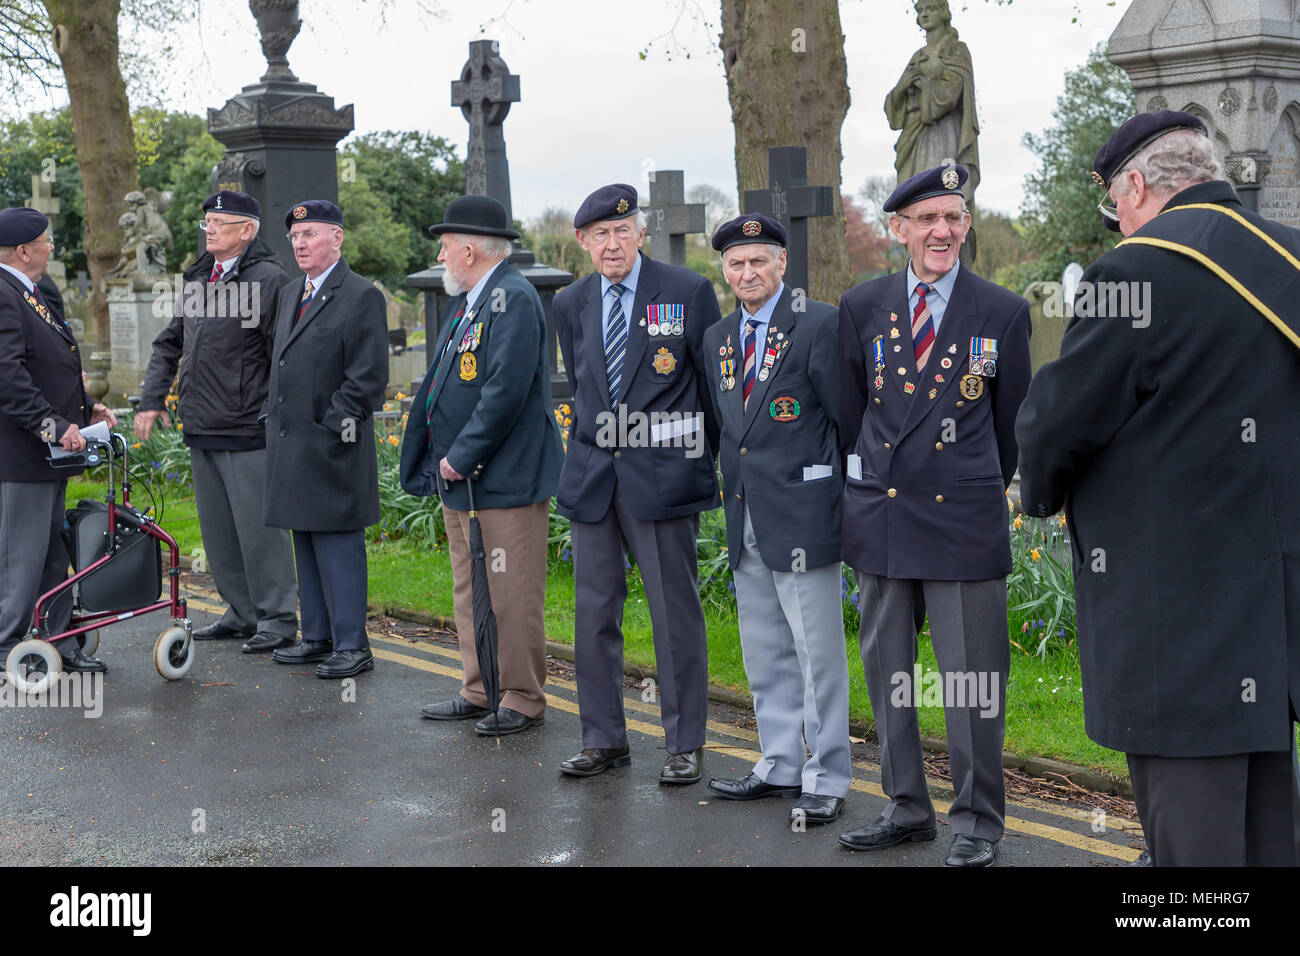 Ex-Servicemen stand in line at Soldiers' Corner waiting for the service to begin to commemorate the anniversary of ANZAC Day - Warrington, UK, 22 April 2018. The Anniversary of ANZAC Day has been commemorated on Sunday 22 April 2018 within Soldiers' Corner of Warrington Cemetery when the Deputy Mayor, Cllr Karen Mundry, Cadets from the Queen's Lancashire Regiment, Warrington Sea Cadets and many veterans were in attendance Credit: John Hopkins/Alamy Live News Stock Photo